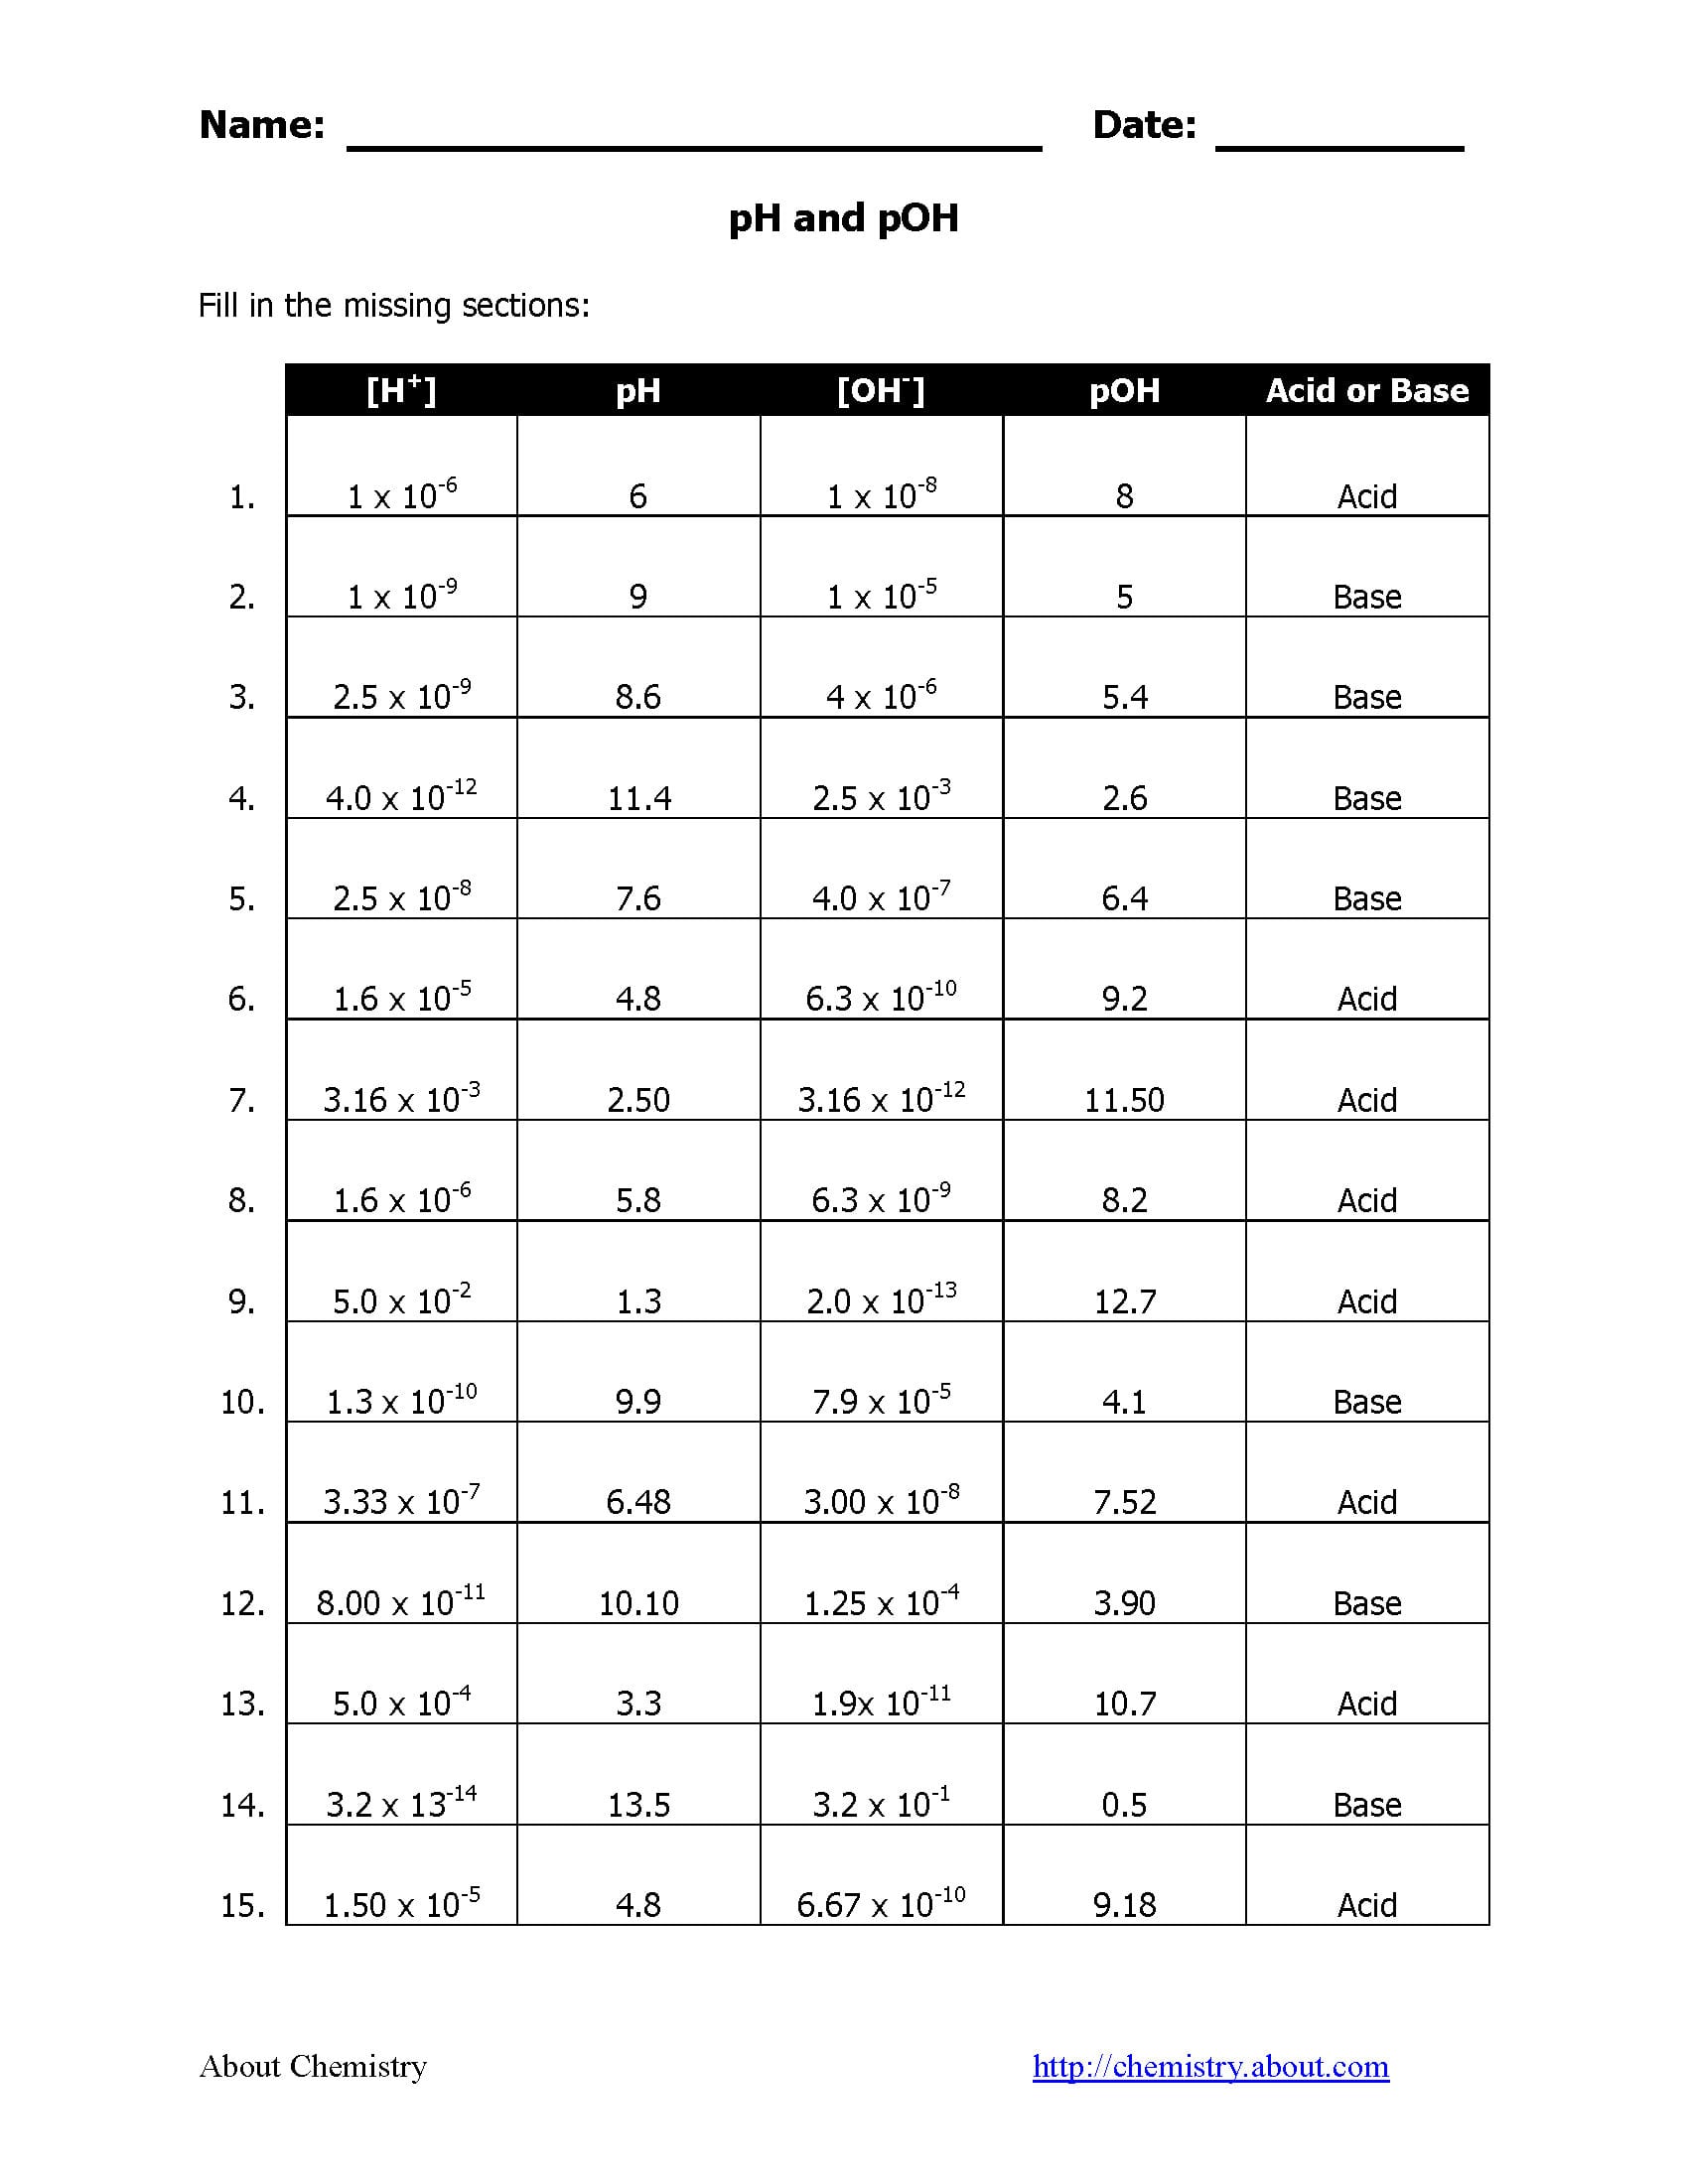 Ph And Poh Worksheet  Caknekaptanbandco As Well As Ph And Poh Calculations Worksheet